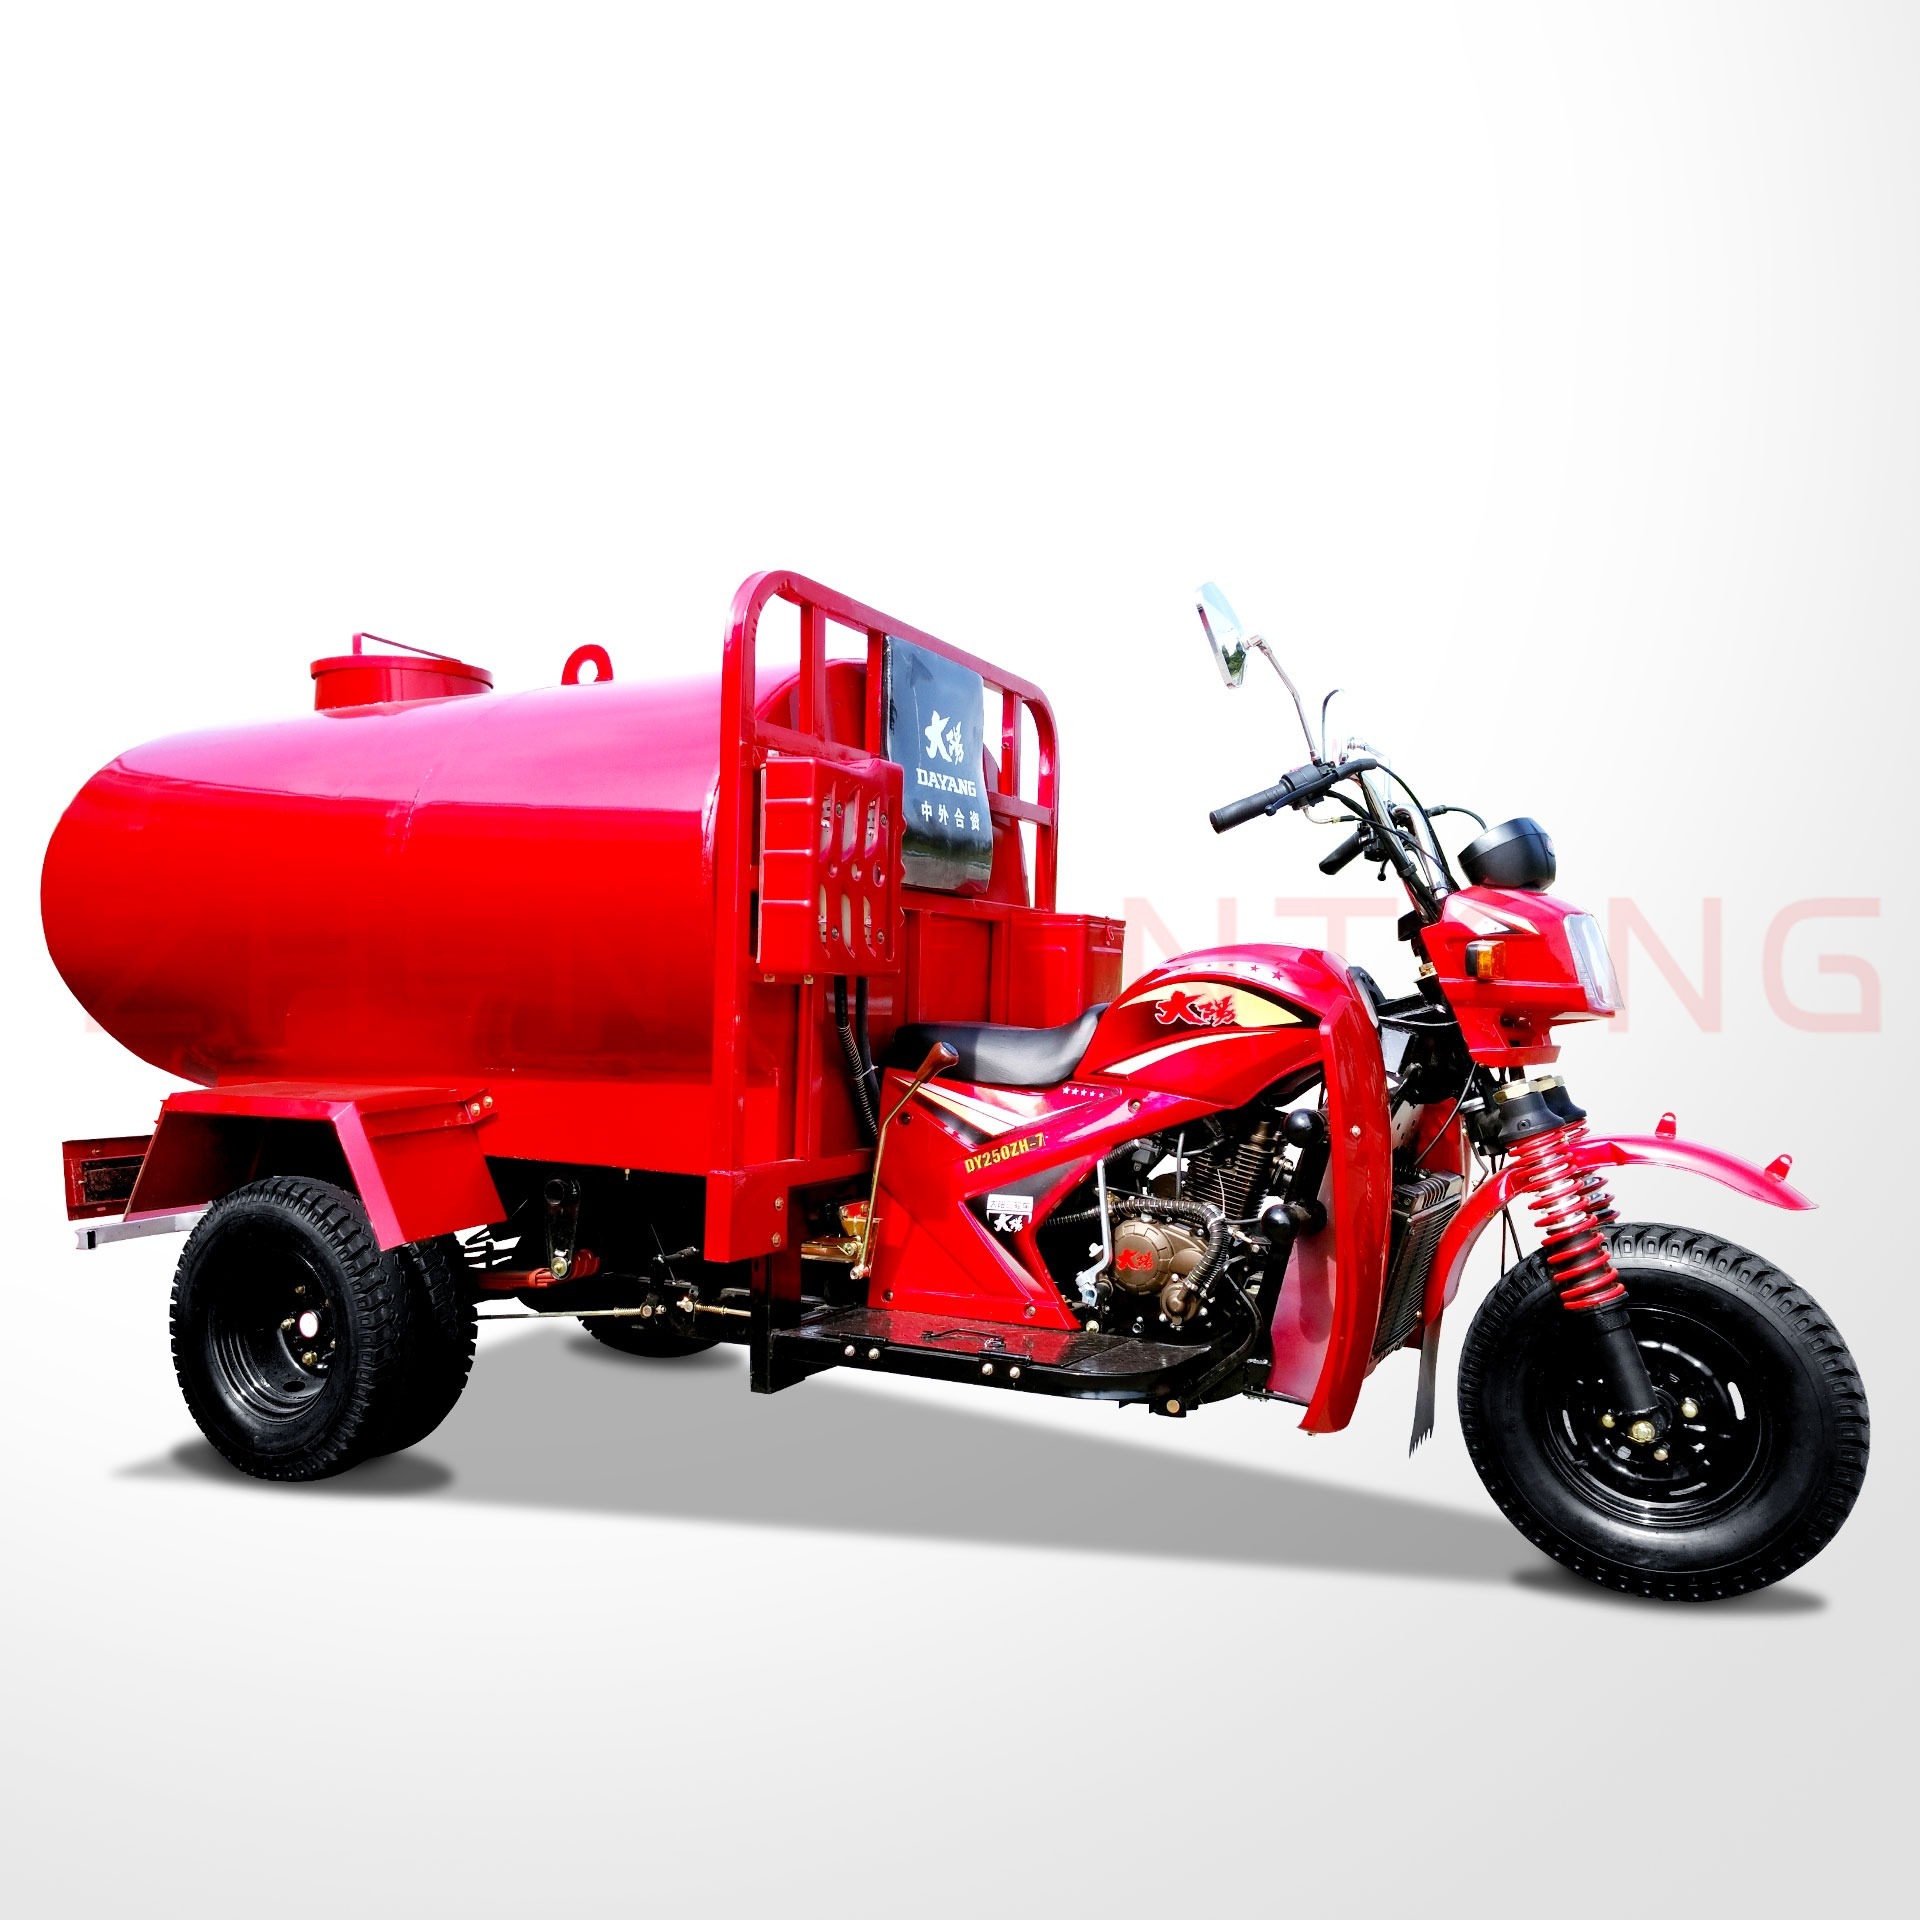 DW-5 African new hot popular fashionable tank water tricycle tuk tuk three wheel motorcycle 250cc water tank tricycle